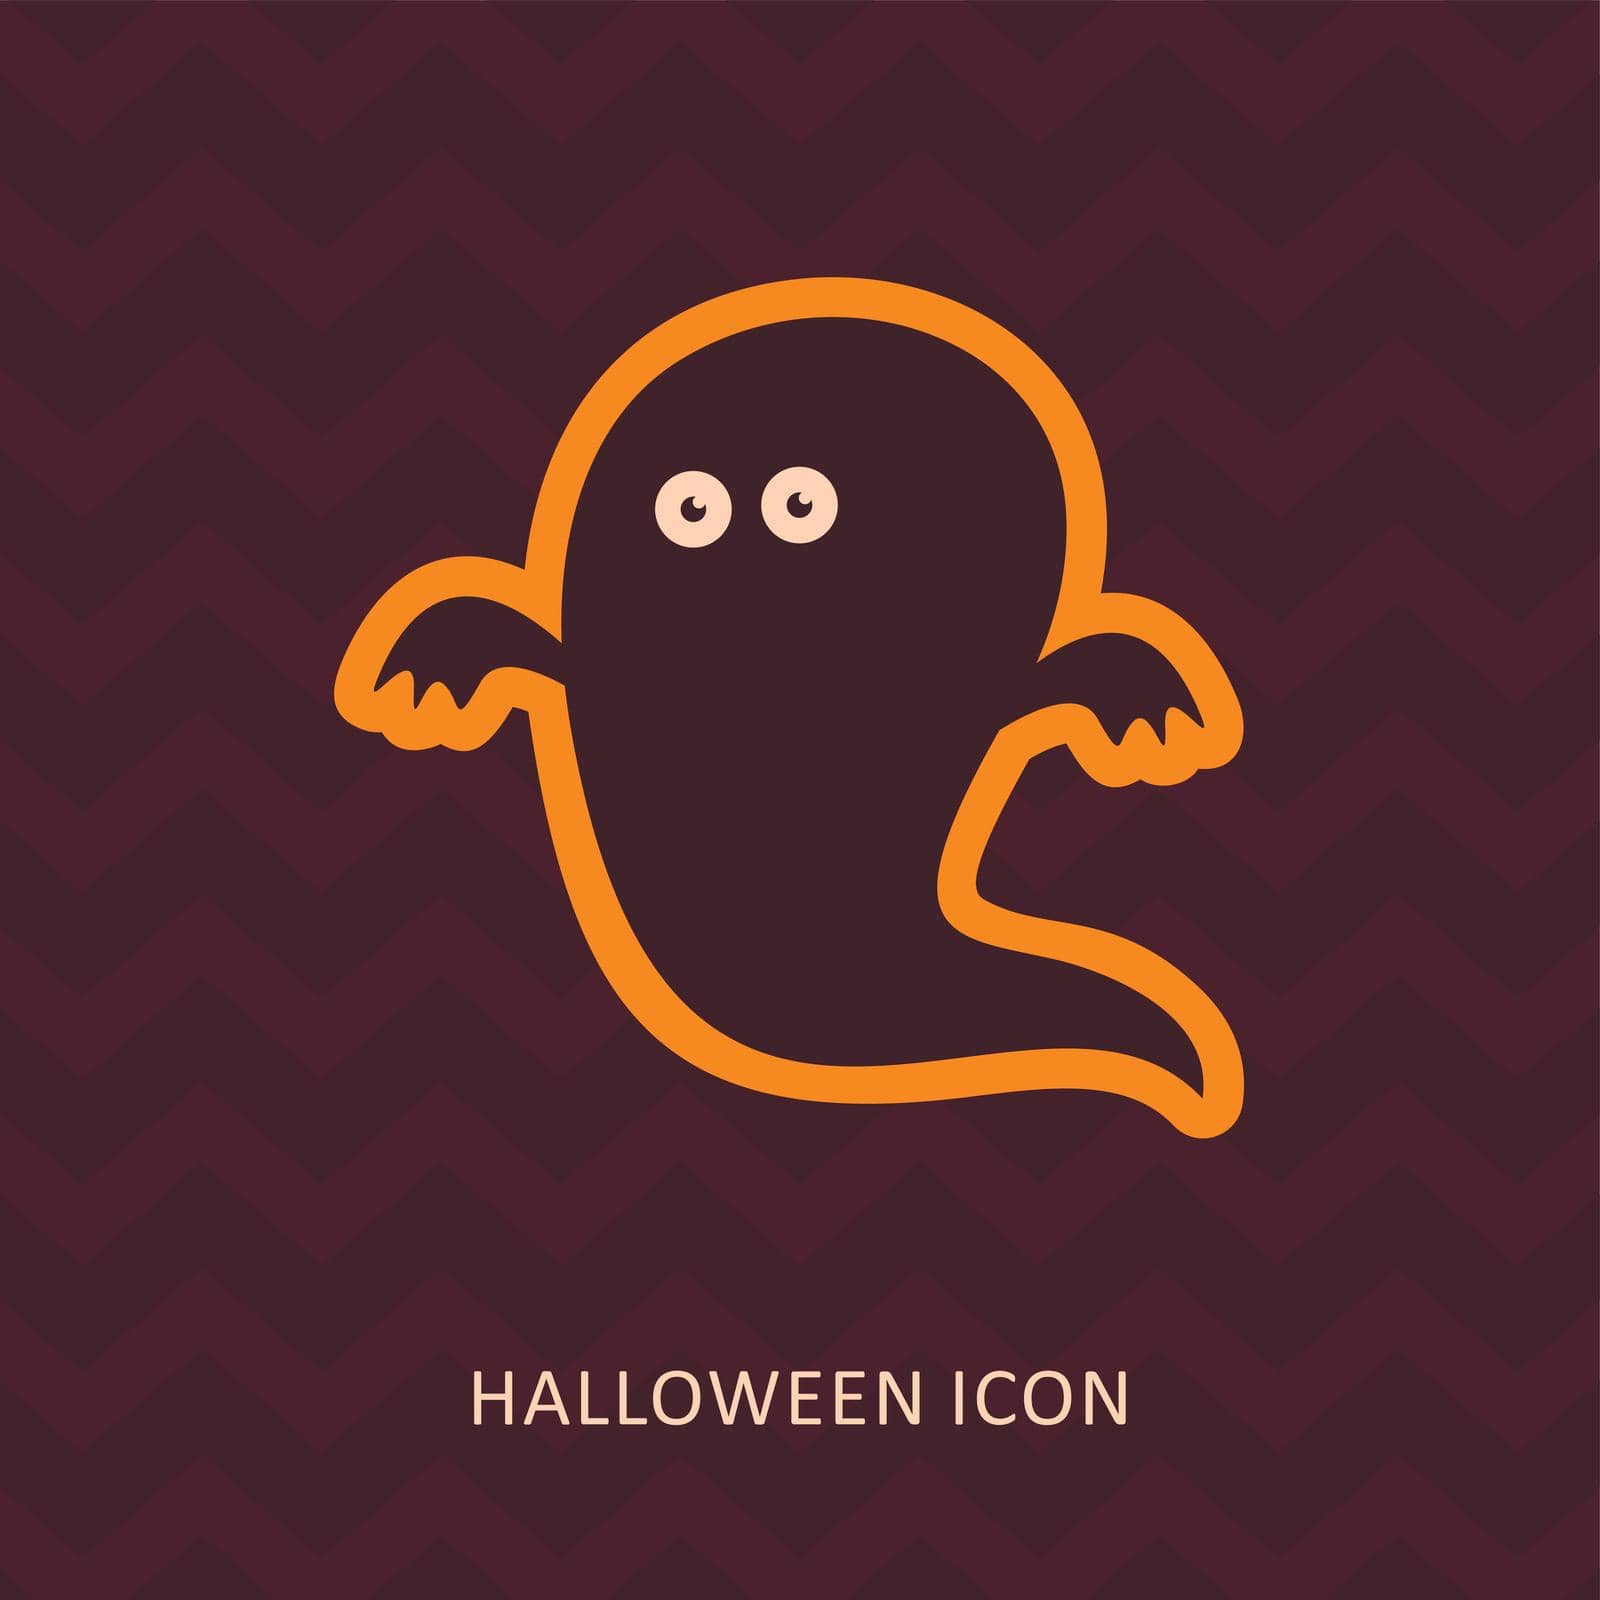 Halloween Ghost vector silhouette icon by nosik